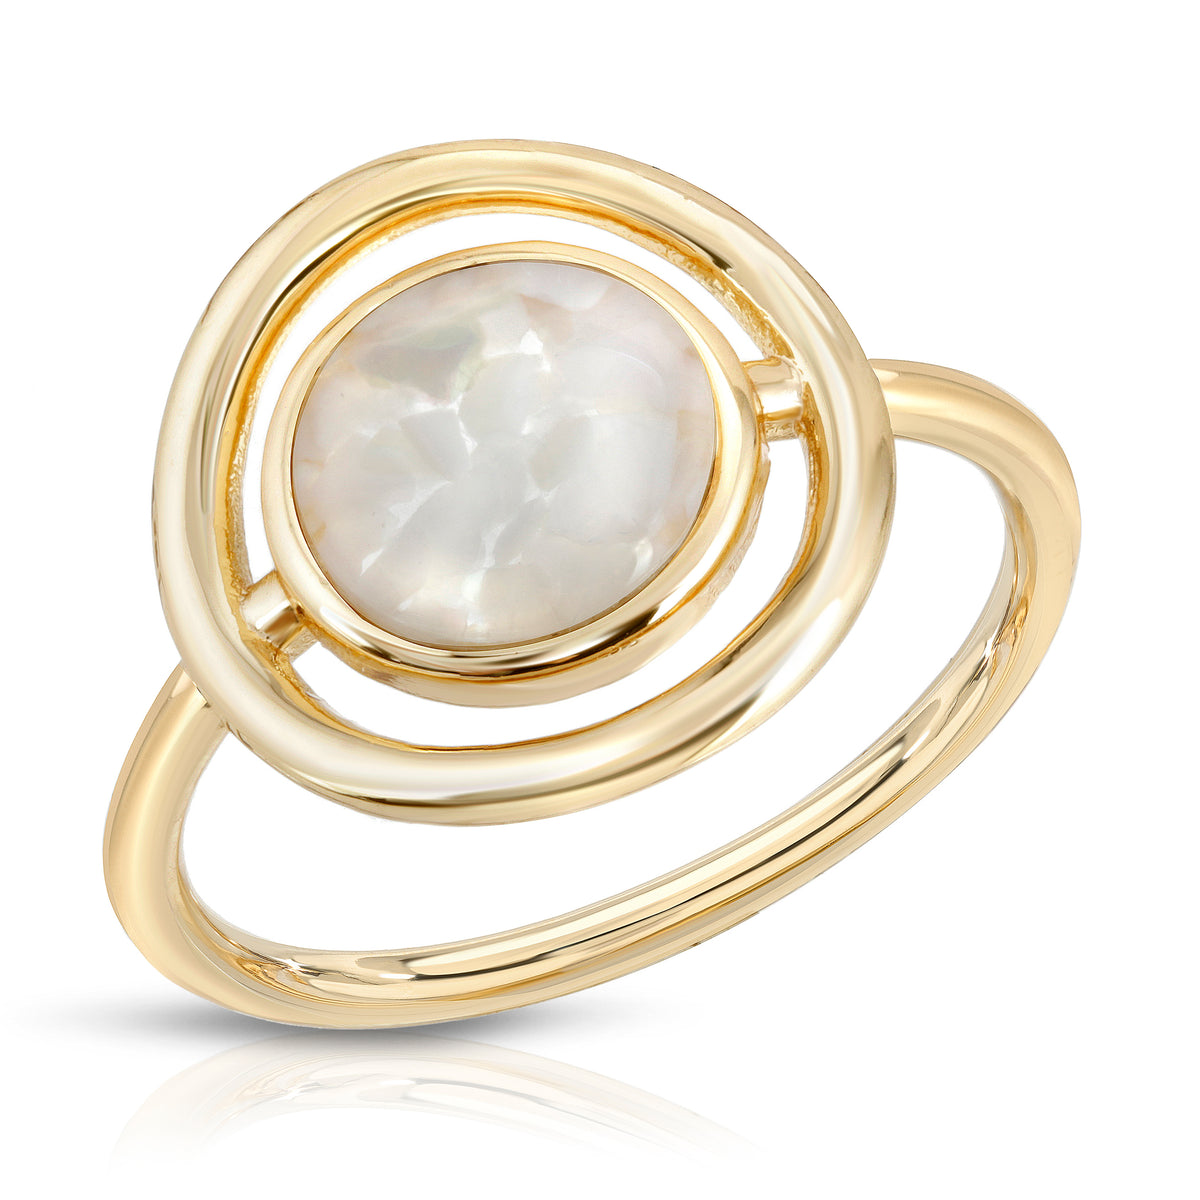 Eclipse Ring- Cracked Mother of Pearl